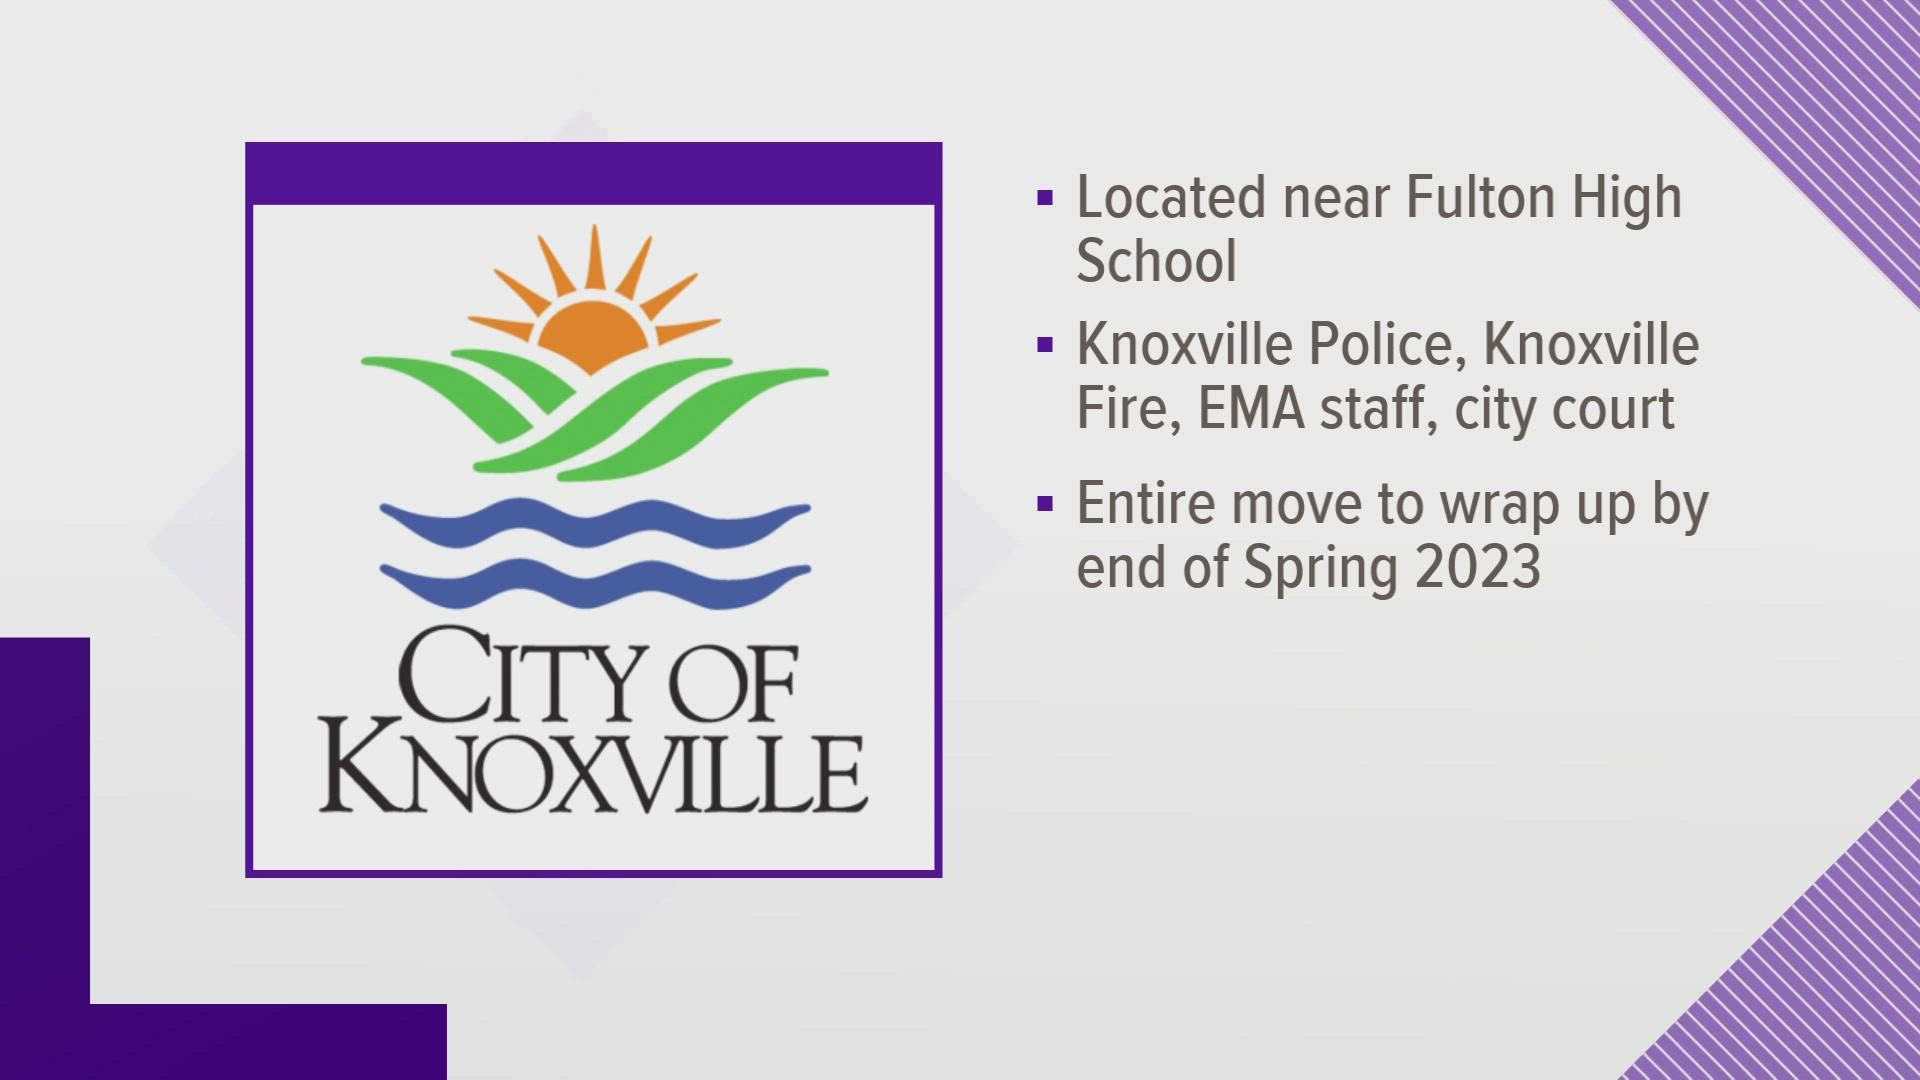 Knoxville leaders said that after KFD moves into the new complex, they will be joined by the Knoxville Police Department, City Court, and the backup E-911 center.